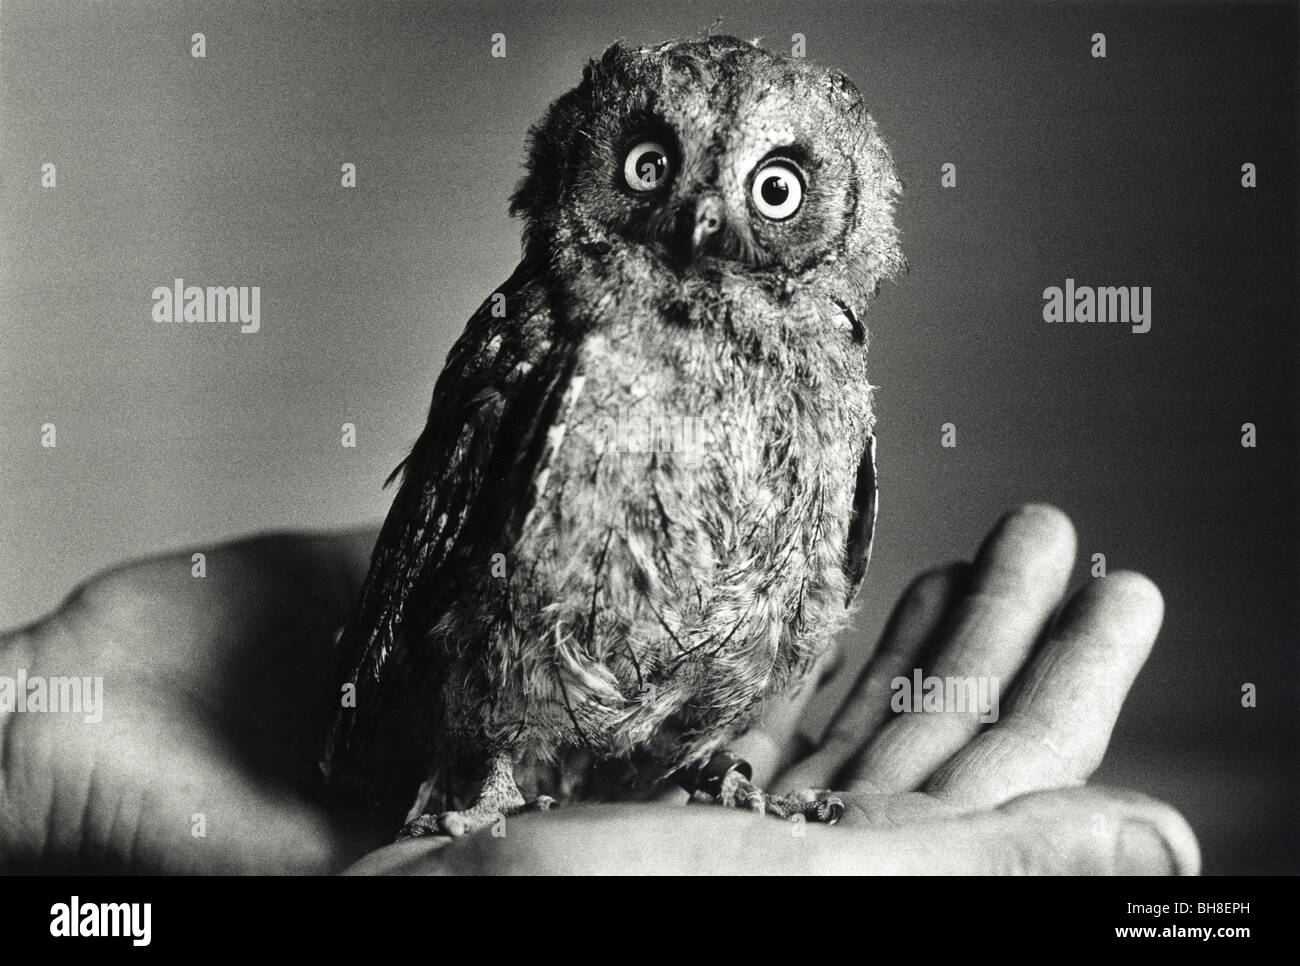 A baby European Scops Owl nestles in a hand Stock Photo